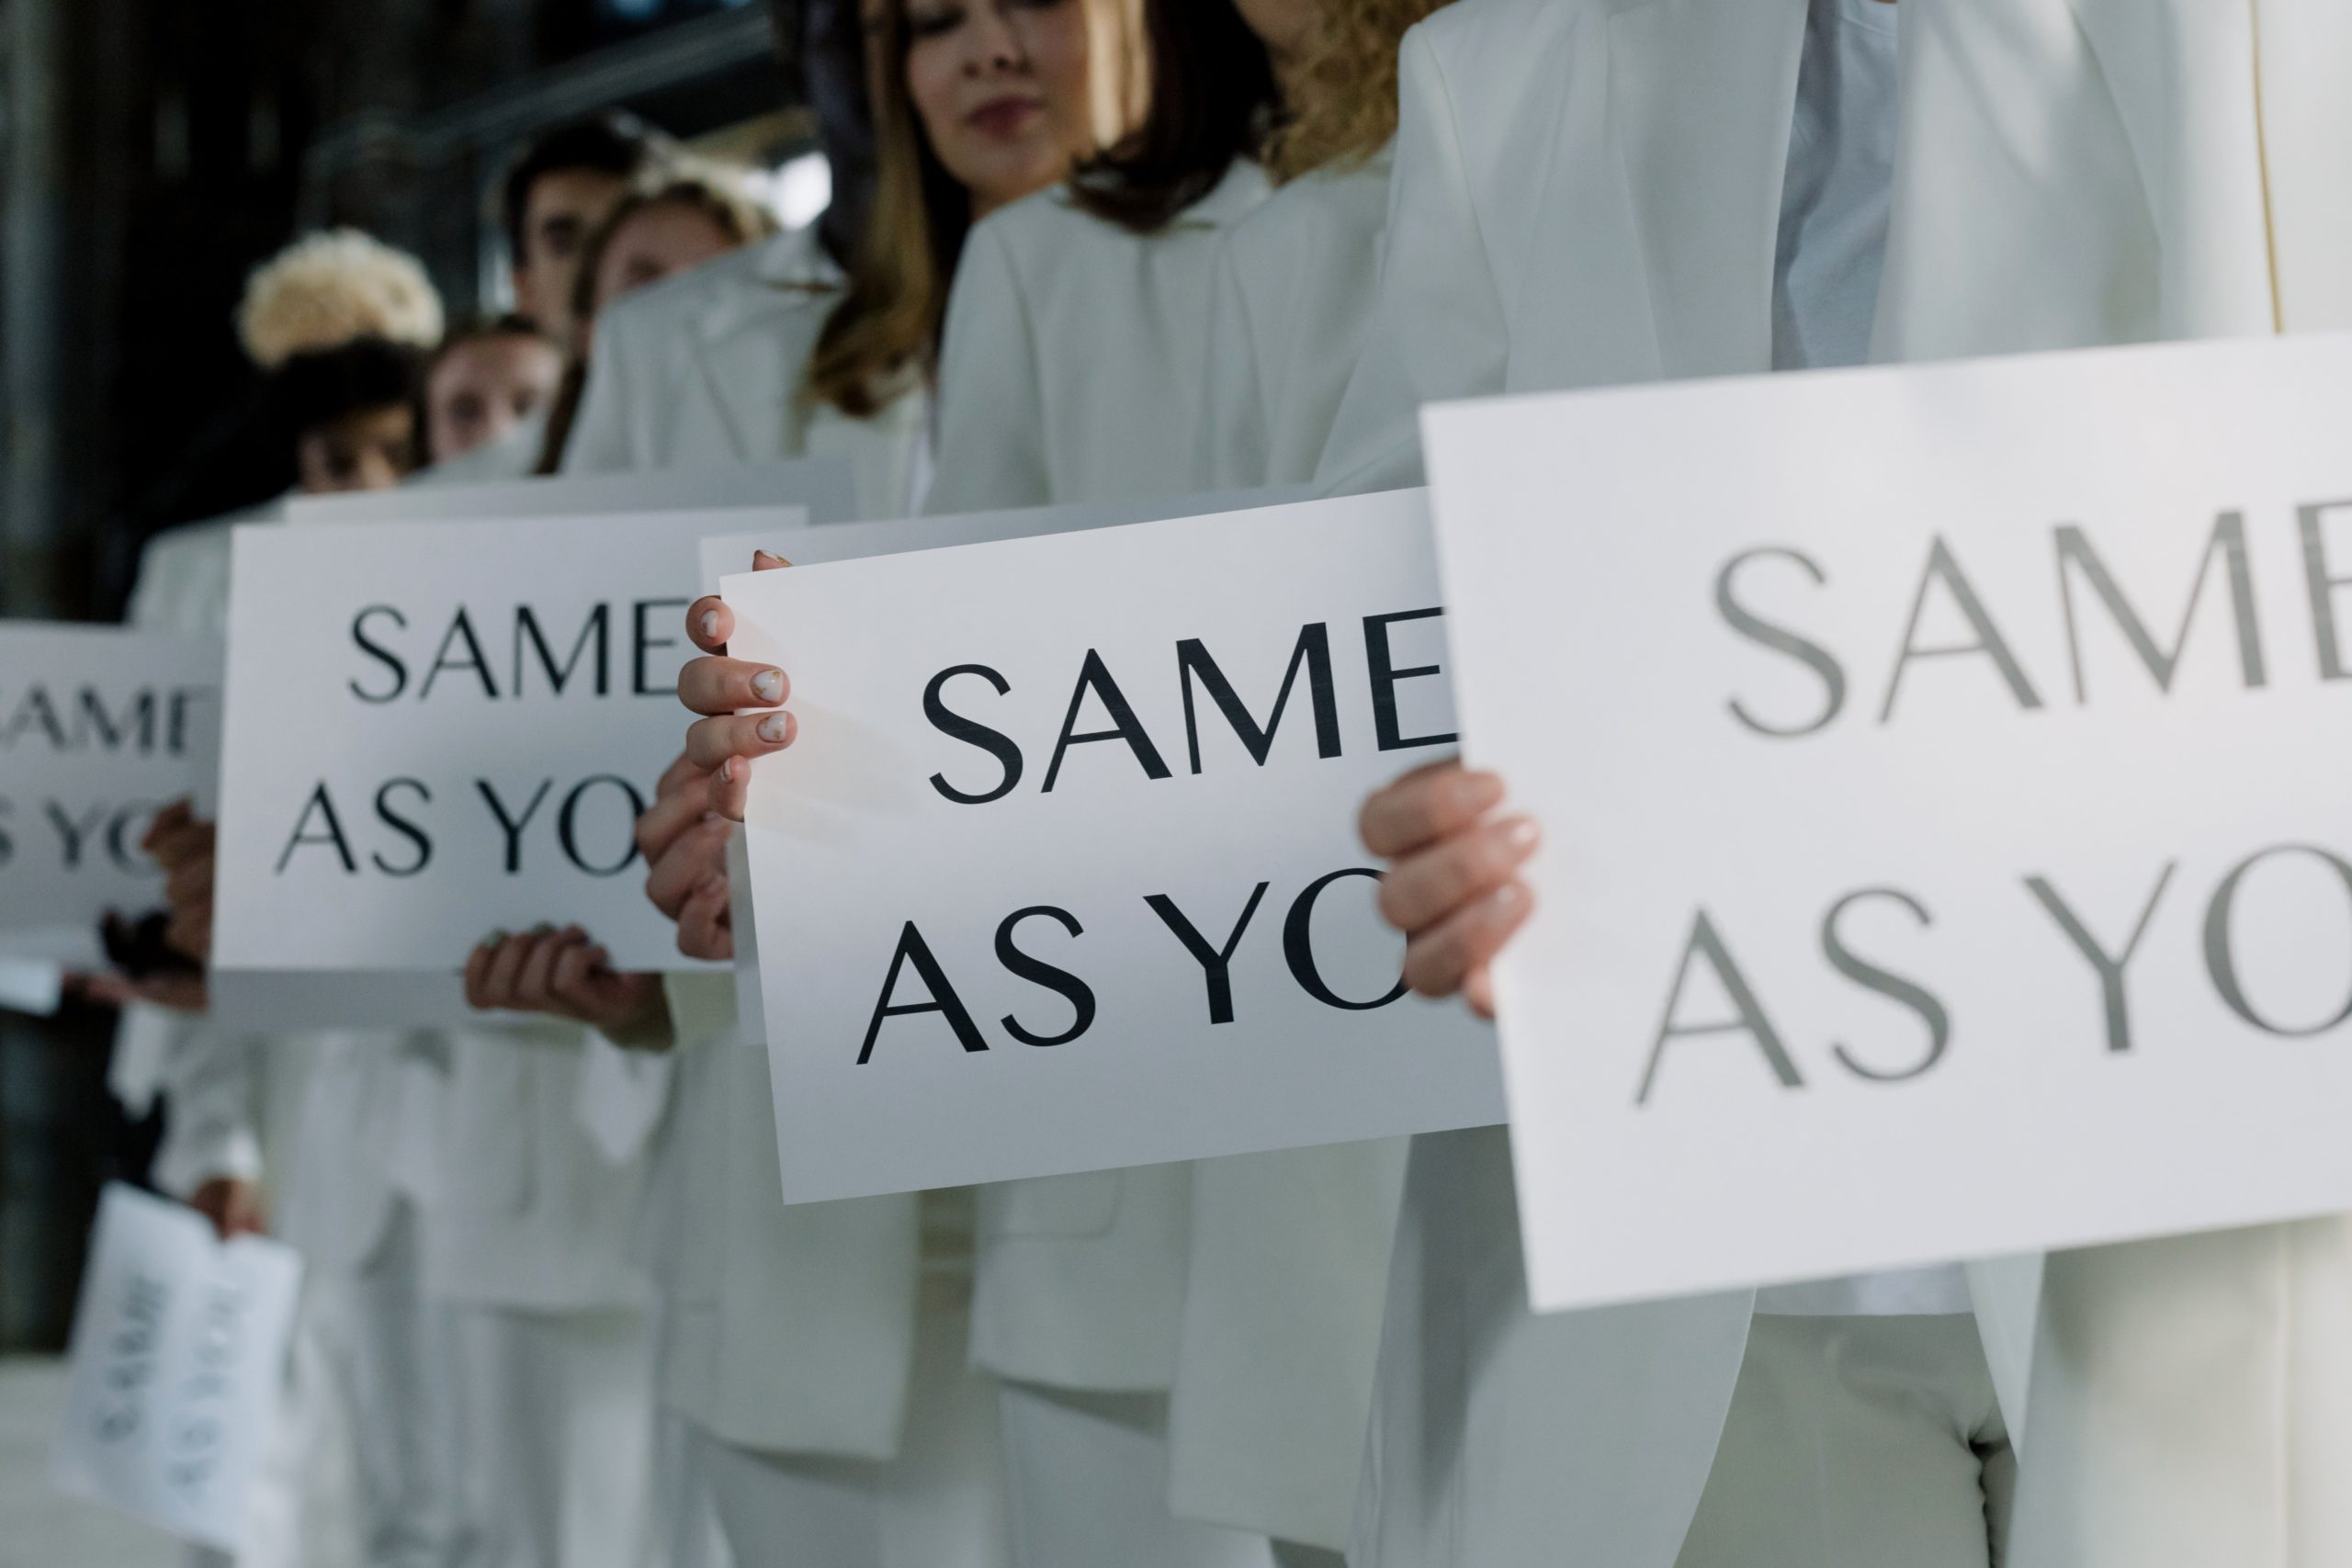 Several people in white suits hold up signs that say, "SAME AS YOU."